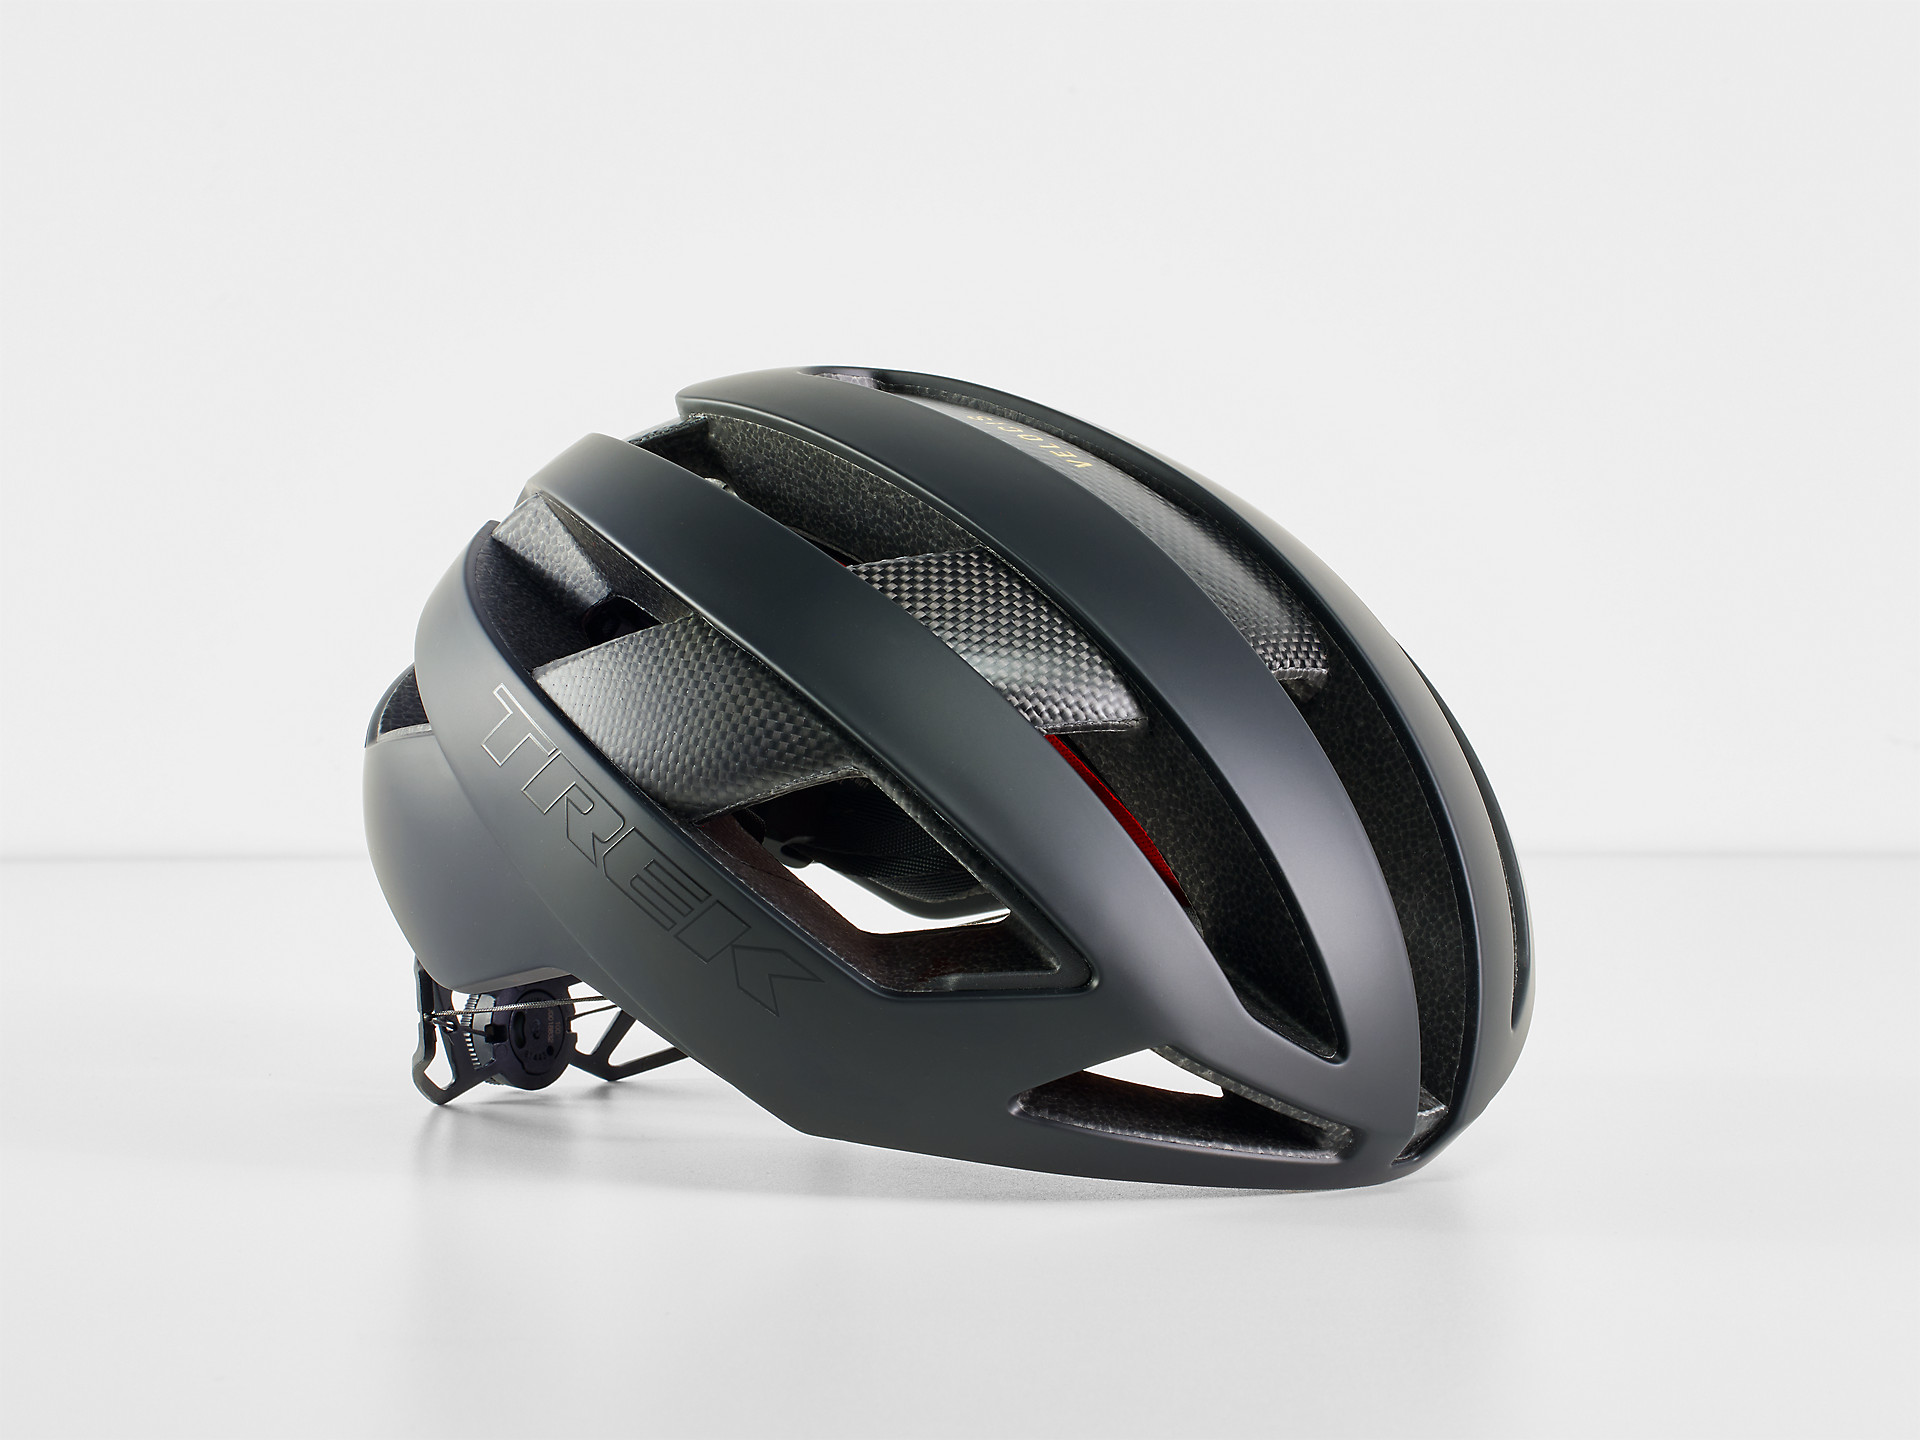 <a href="https://cycles-clement.be/product/casque-trek-velocis-mips-m-noir/">CASQUE TREK VELOCIS MIPS M NOIR</a>